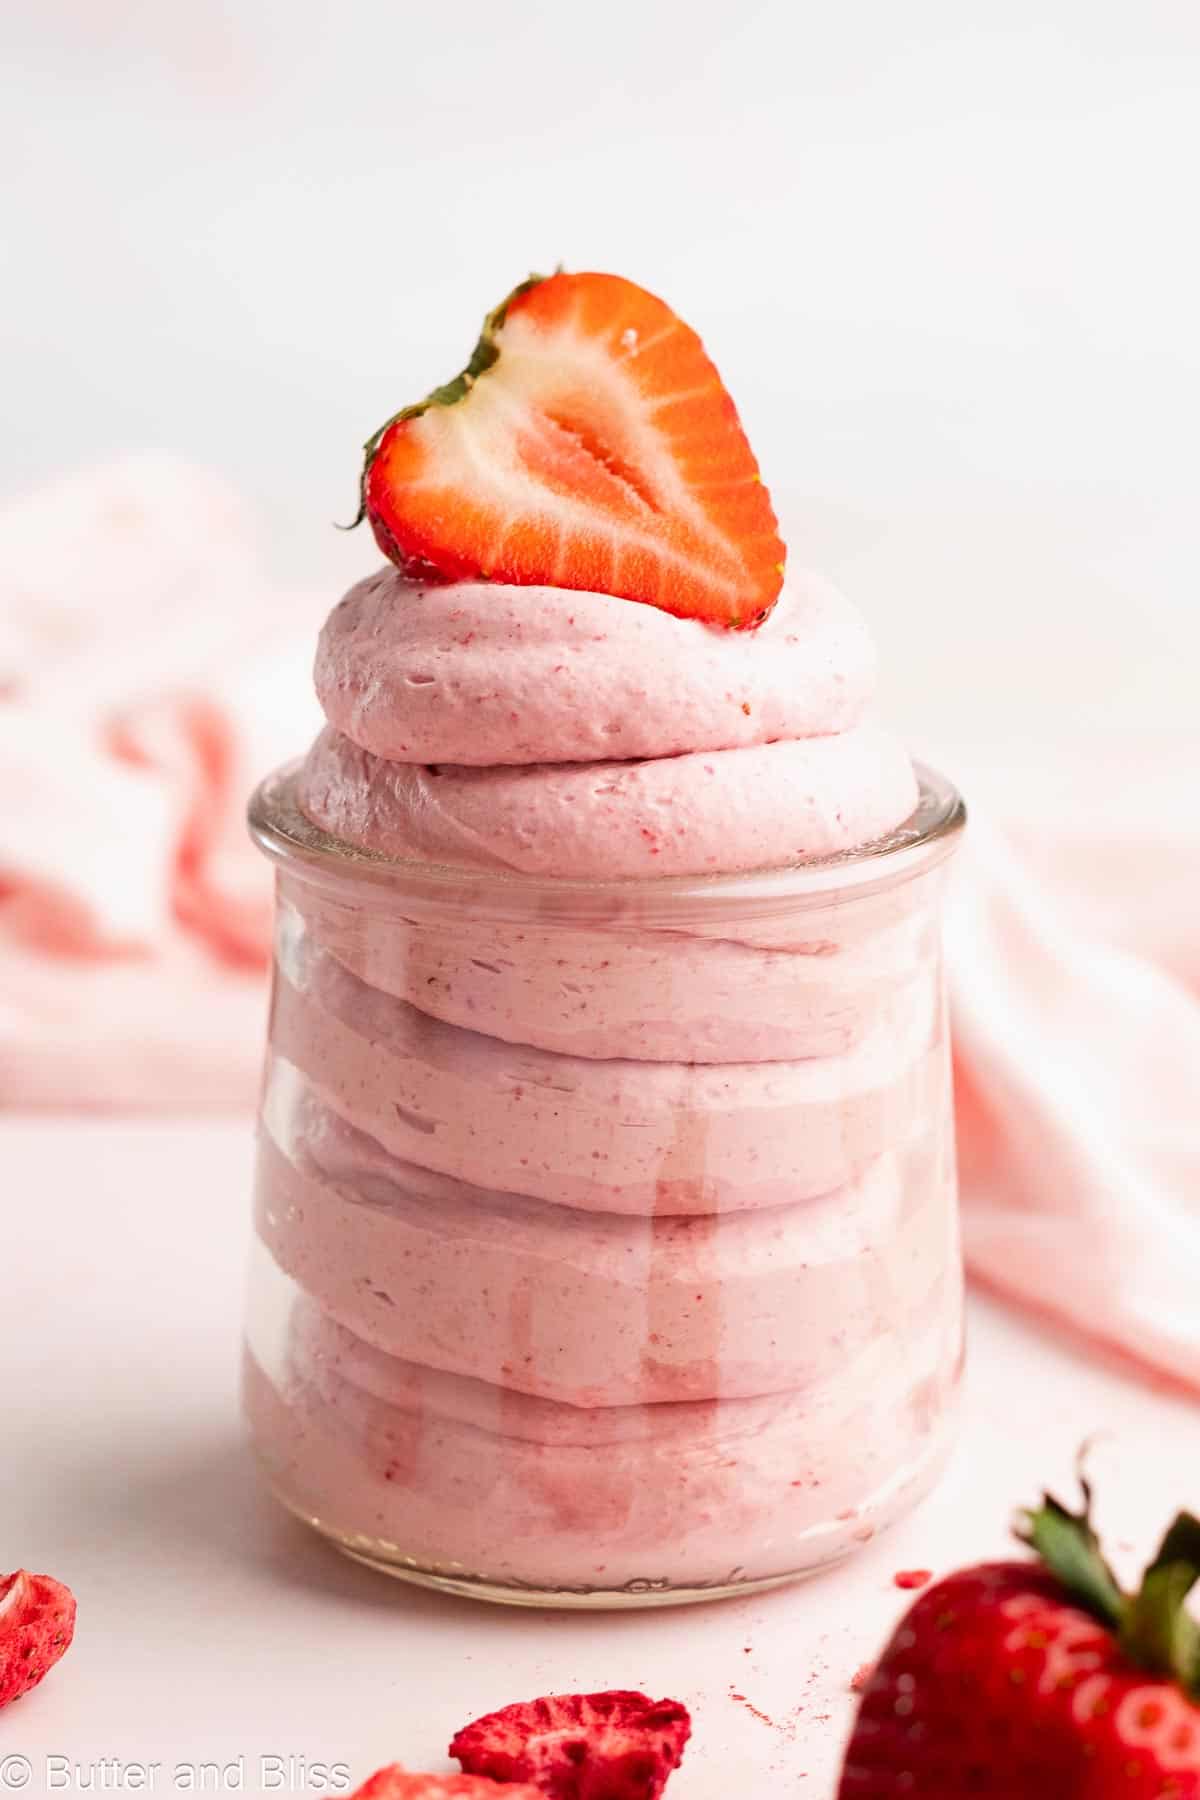 Whipped coconut cream with strawberry swirled in a jar.